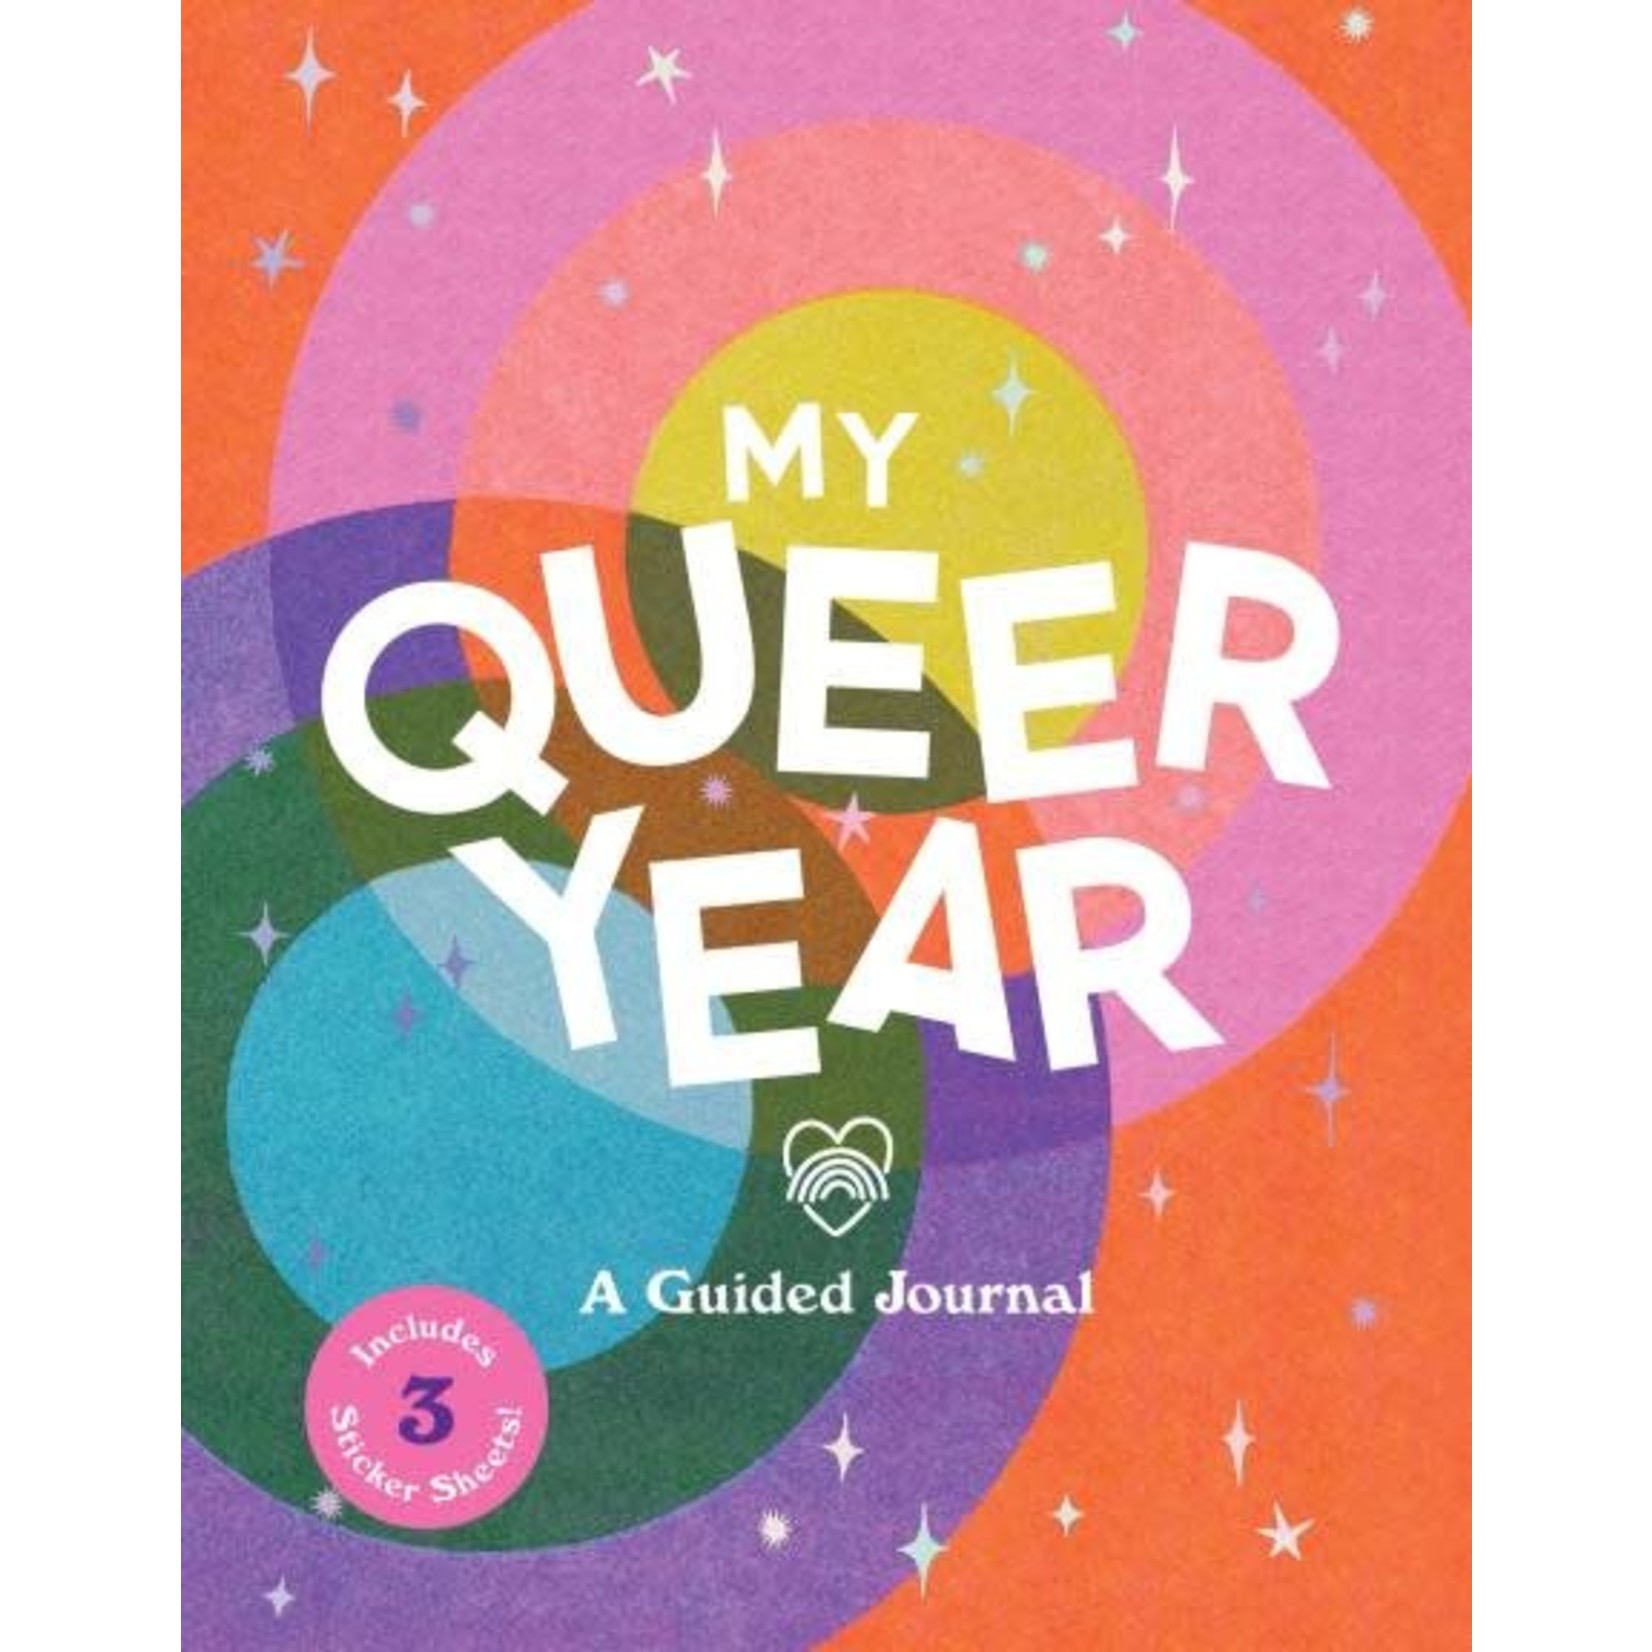 My Queer Year Guided Journal